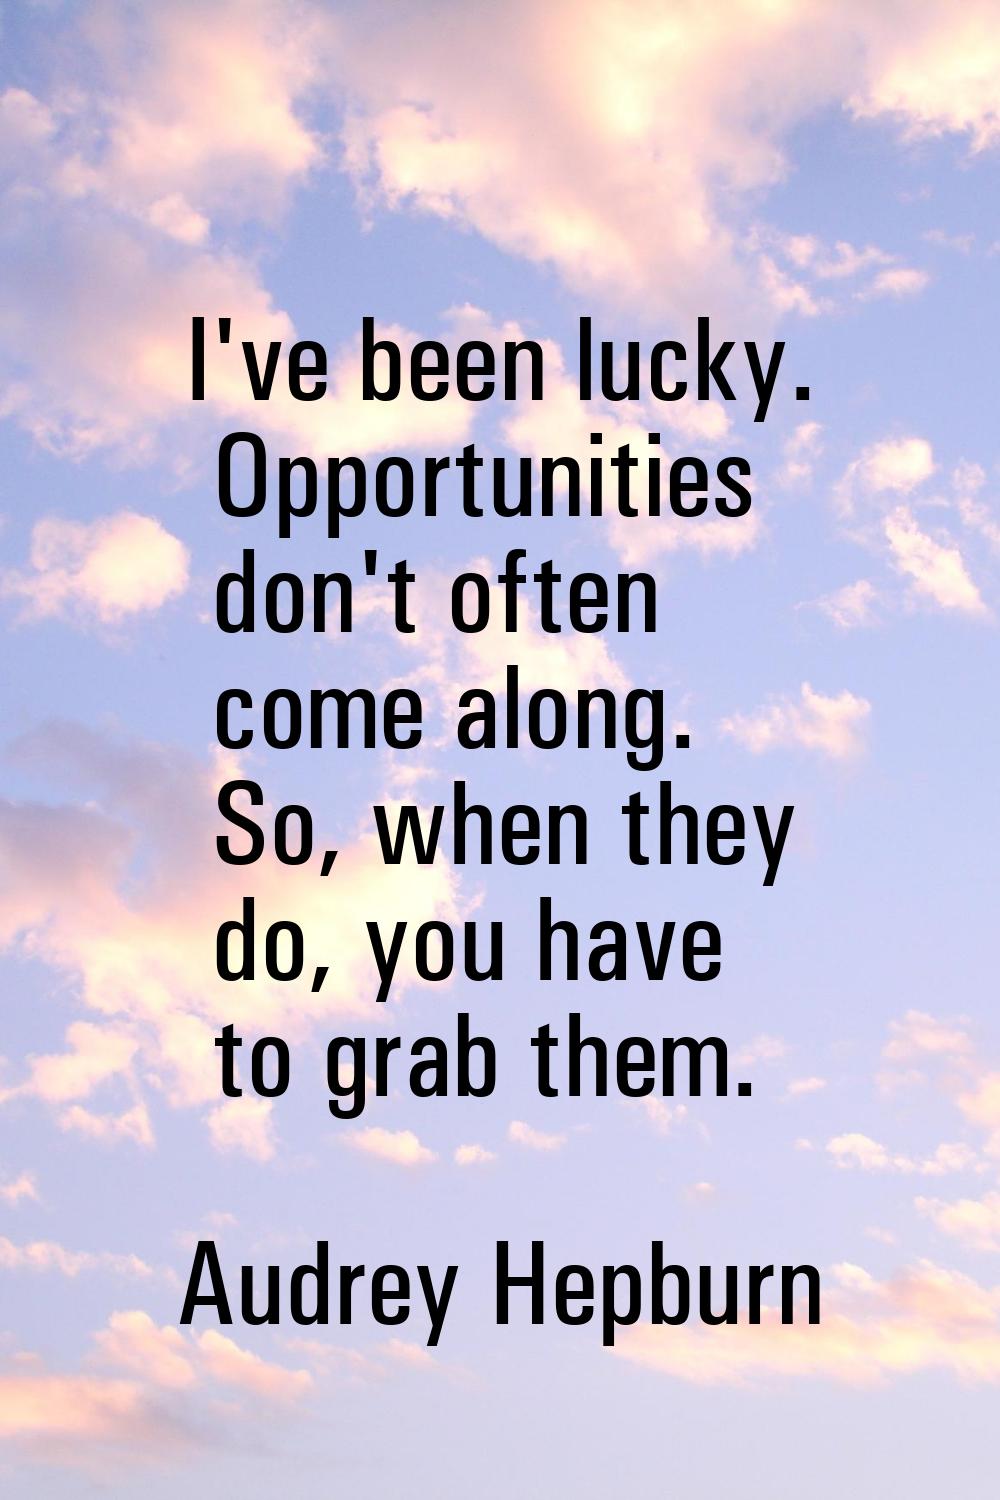 I've been lucky. Opportunities don't often come along. So, when they do, you have to grab them.